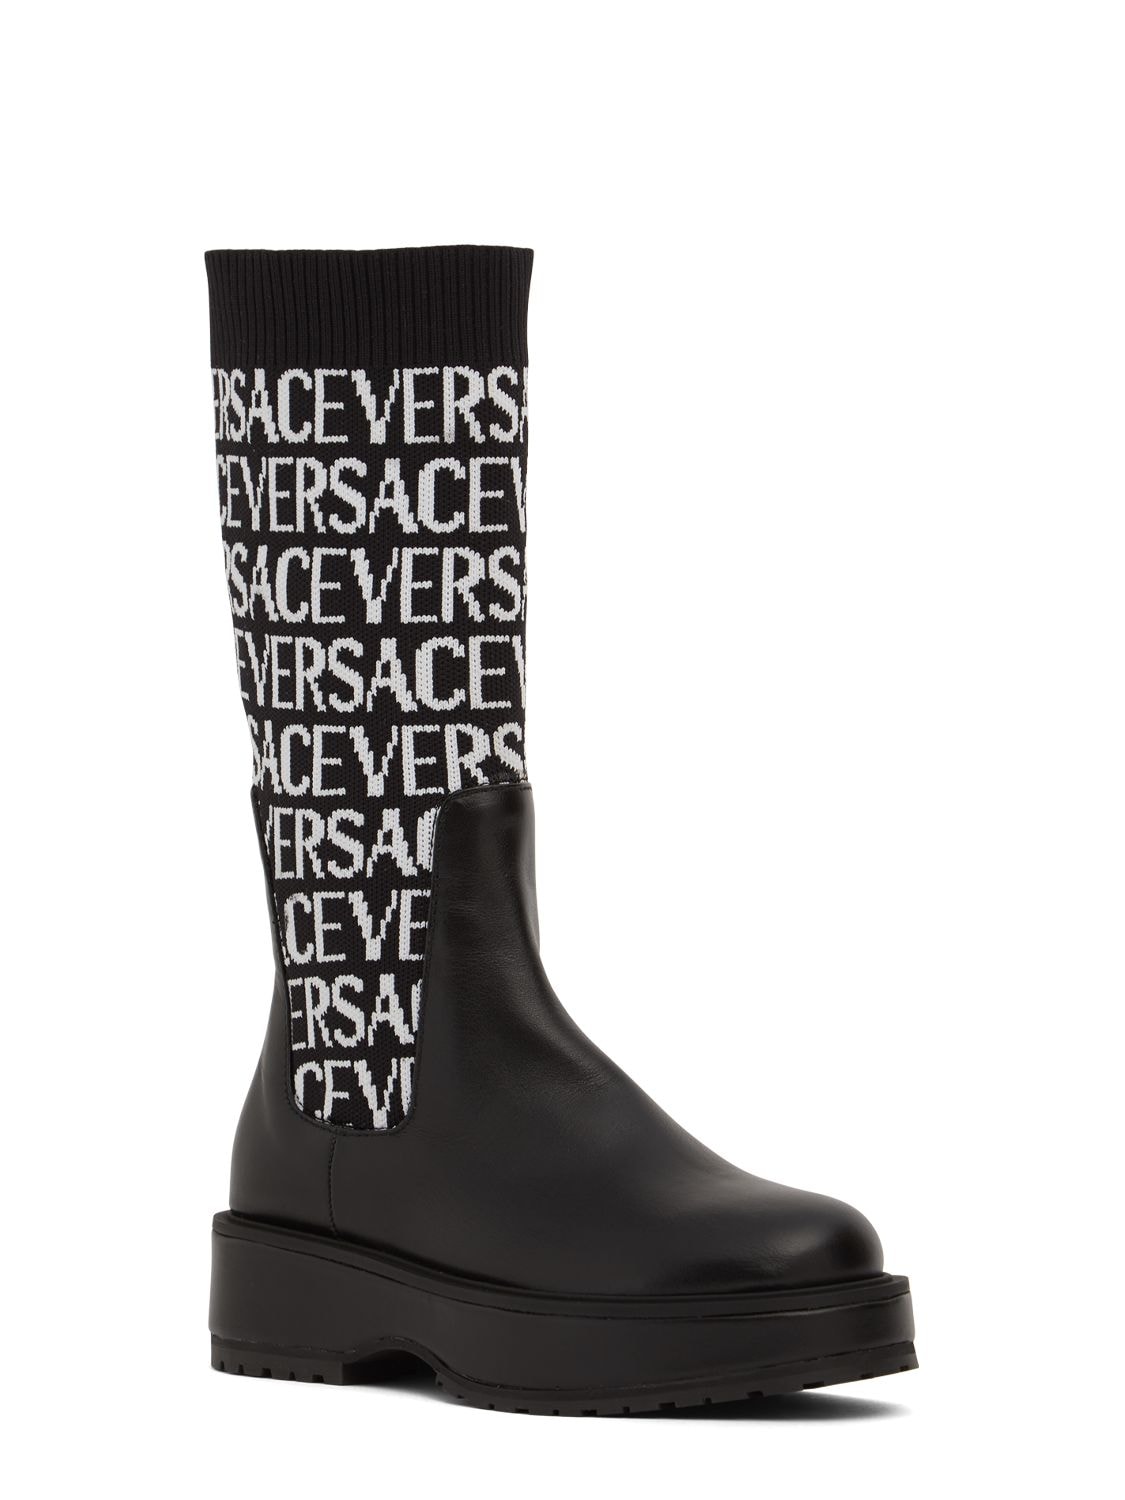 VERSACE LOGO JACQUARD KNIT & LEATHER TALL BOOTS 